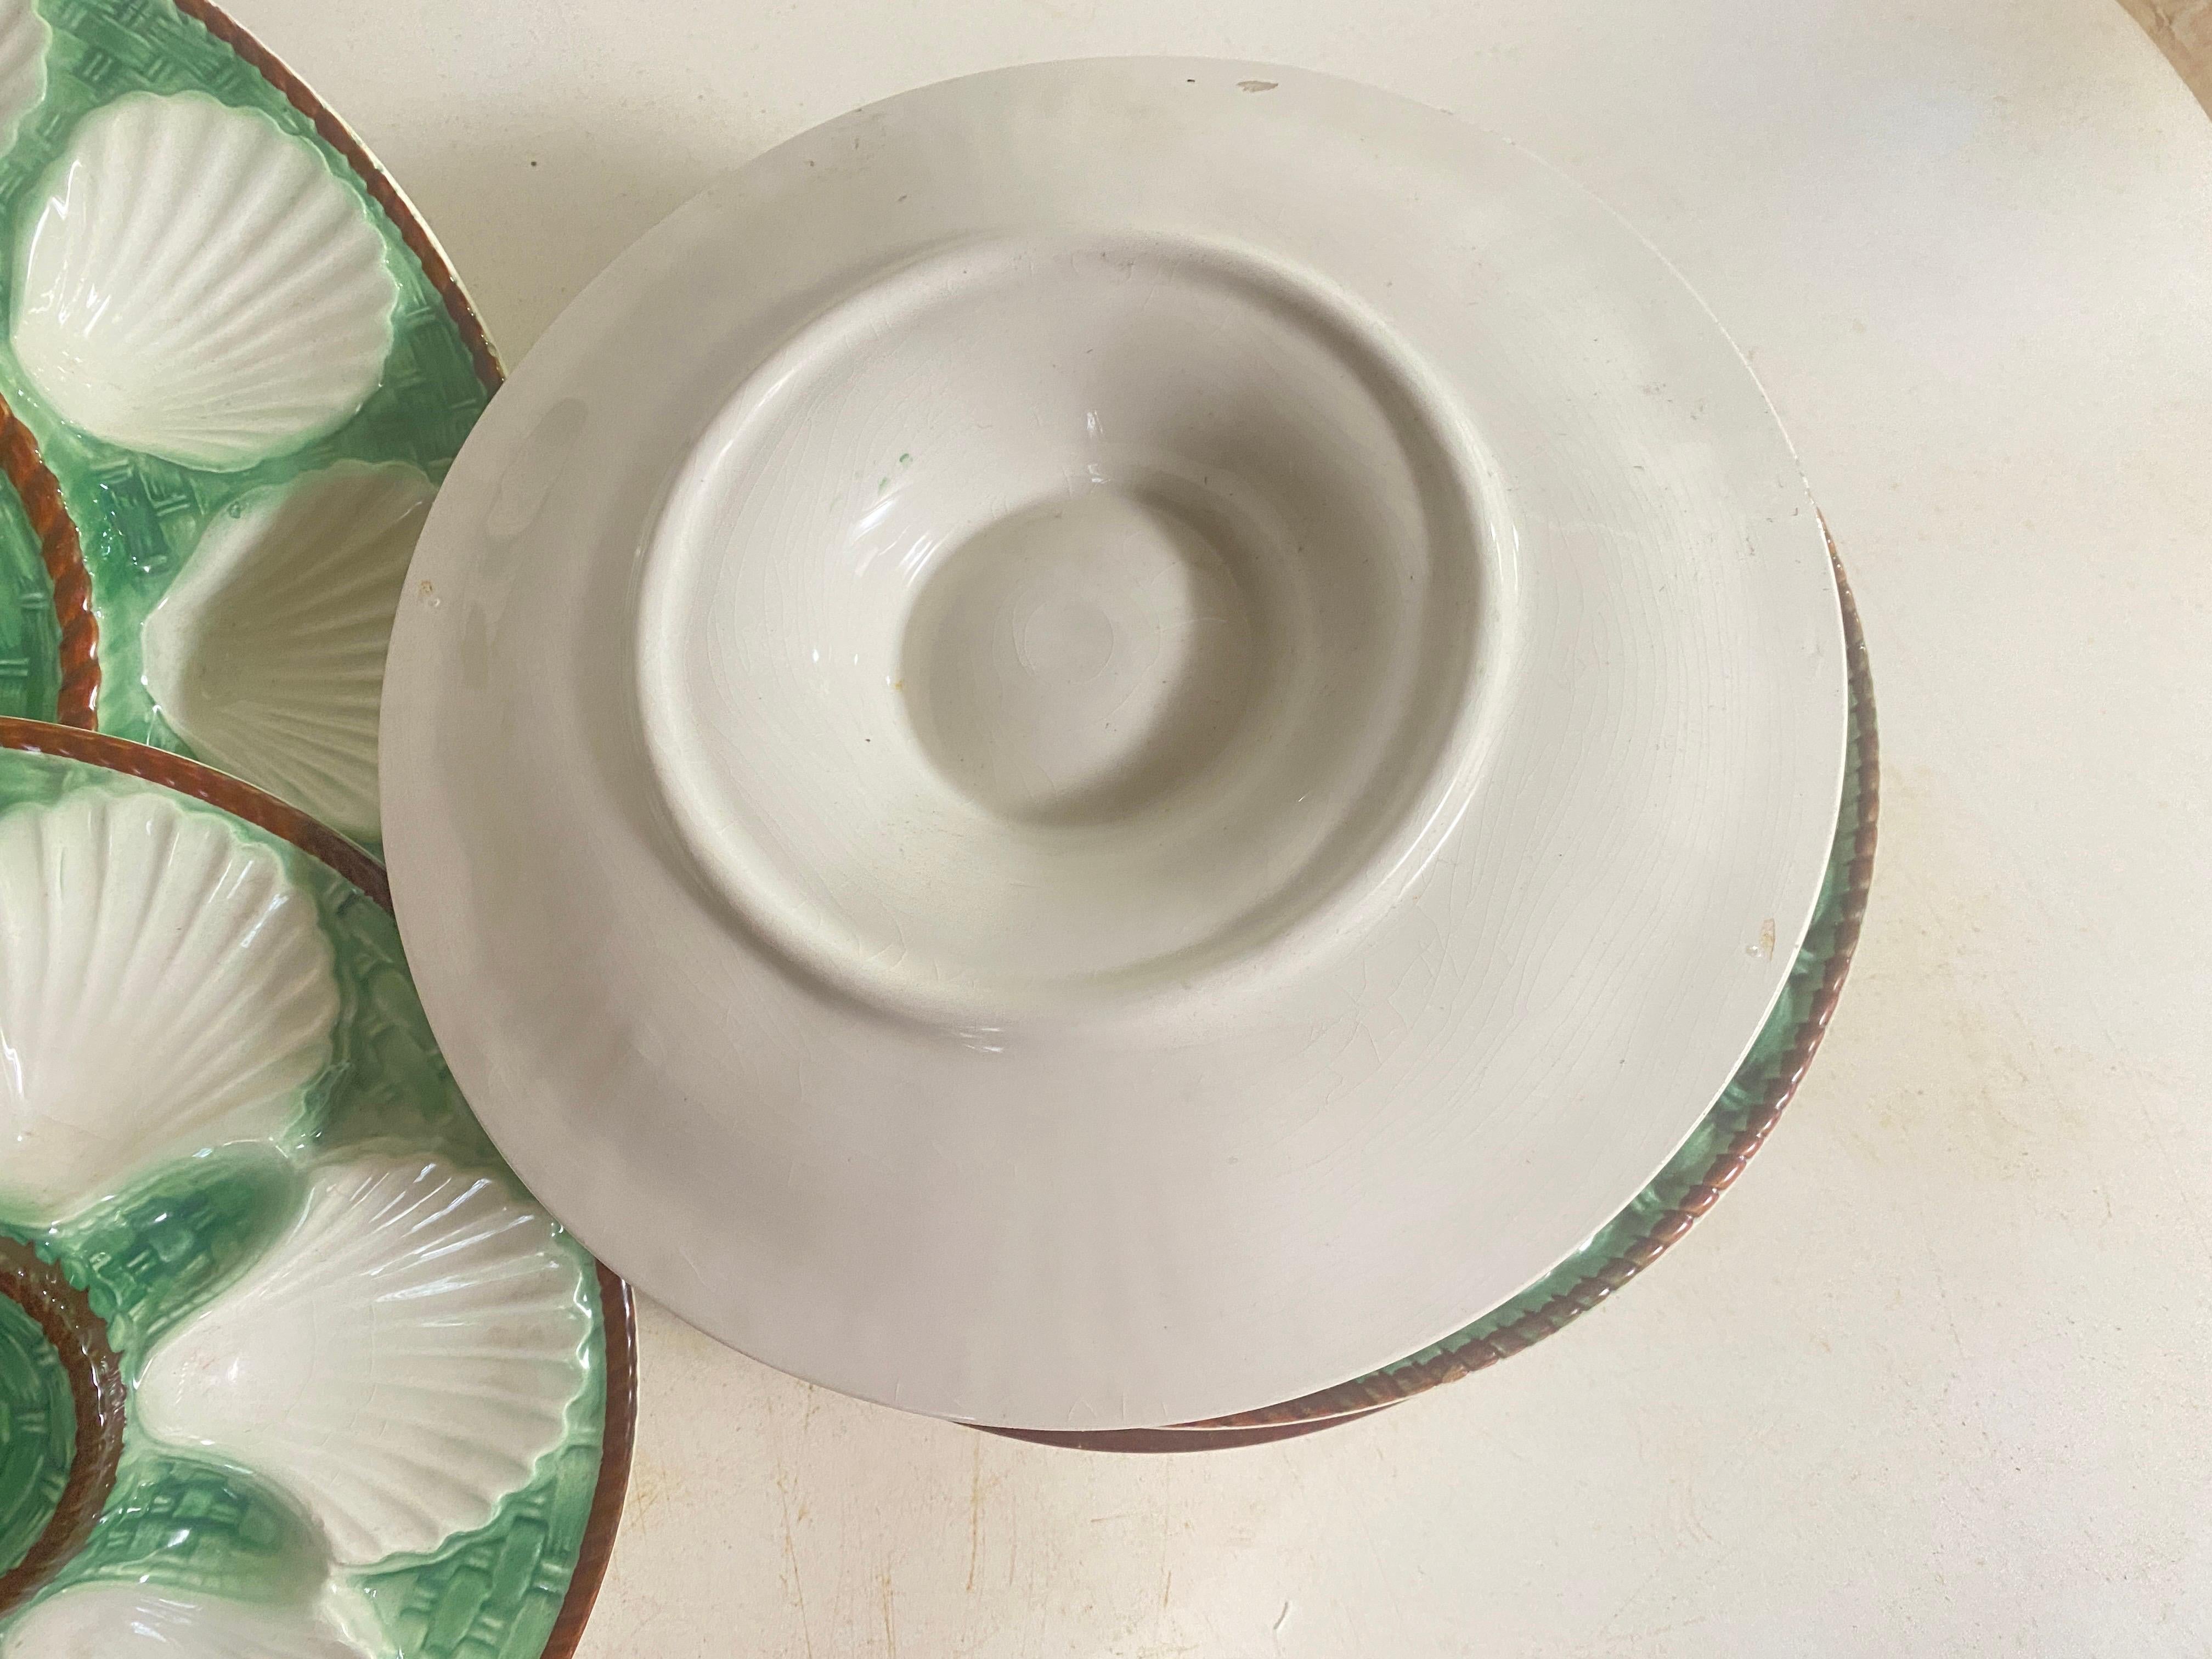 Set of one Large Oyster plate in Cramic and six Plates, in Green white and brown color. Large.
France, 1960.
One large plate is 33 cm diameter.
Diameter of the Plates are 24 cm
By Saint Clement